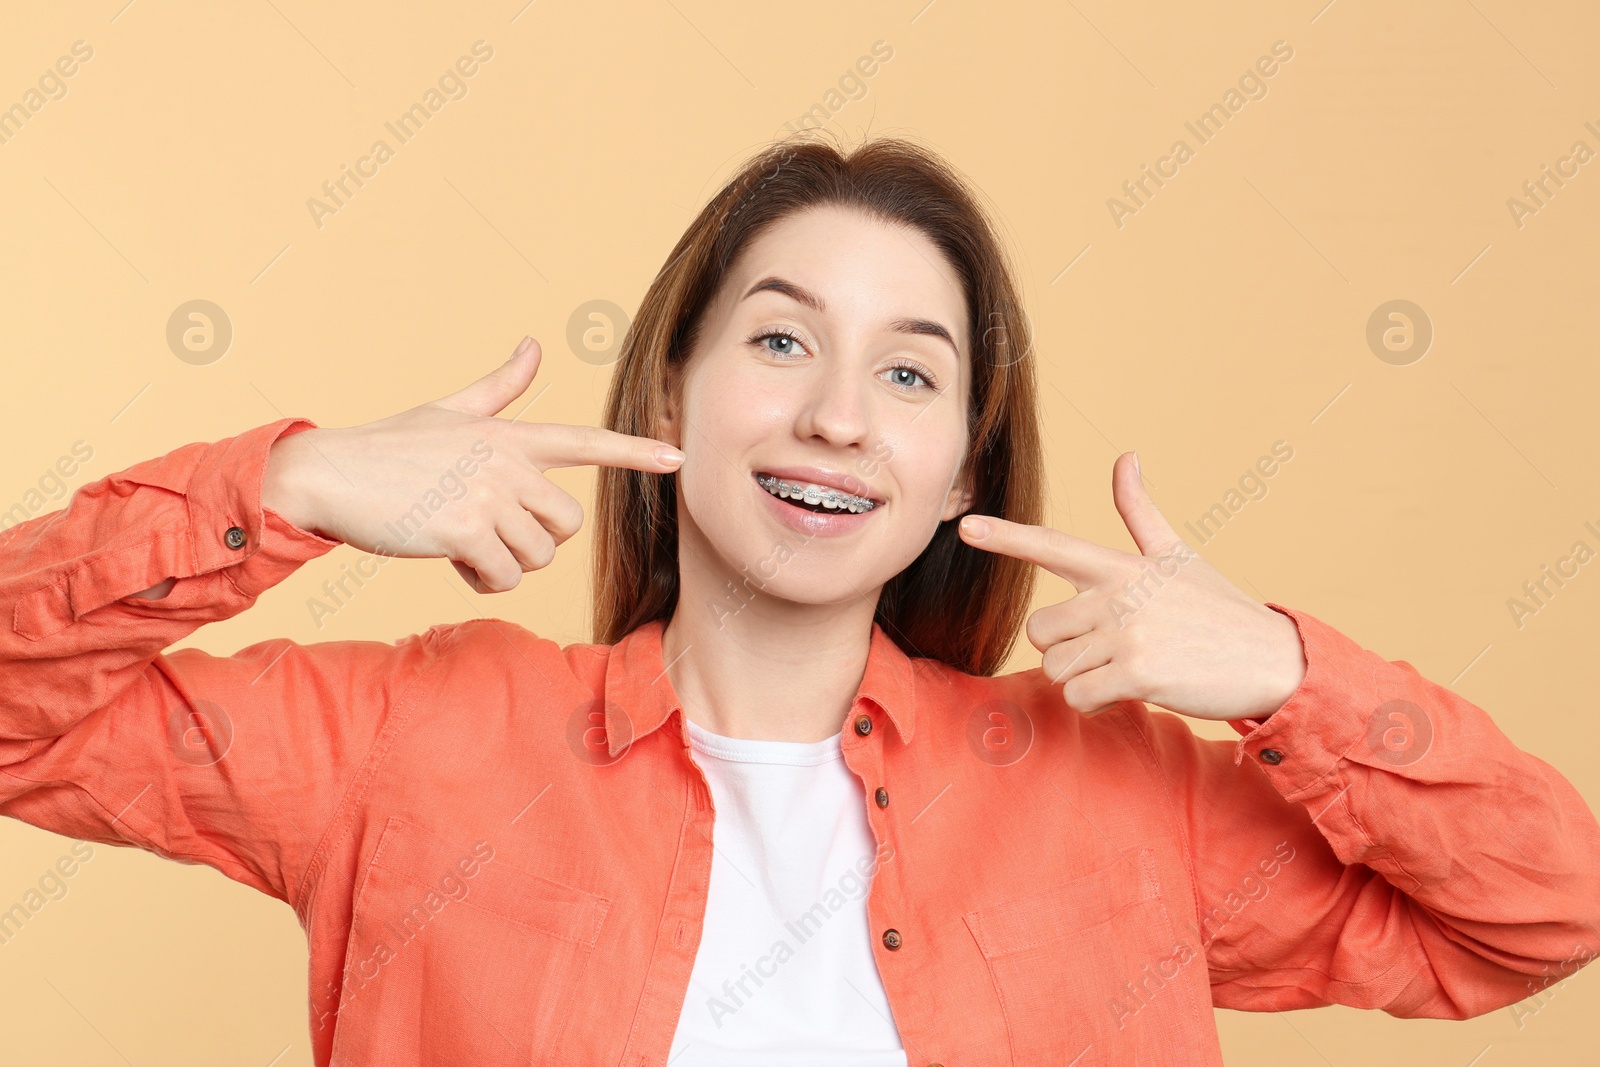 Photo of Portrait of smiling woman pointing at her dental braces on beige background